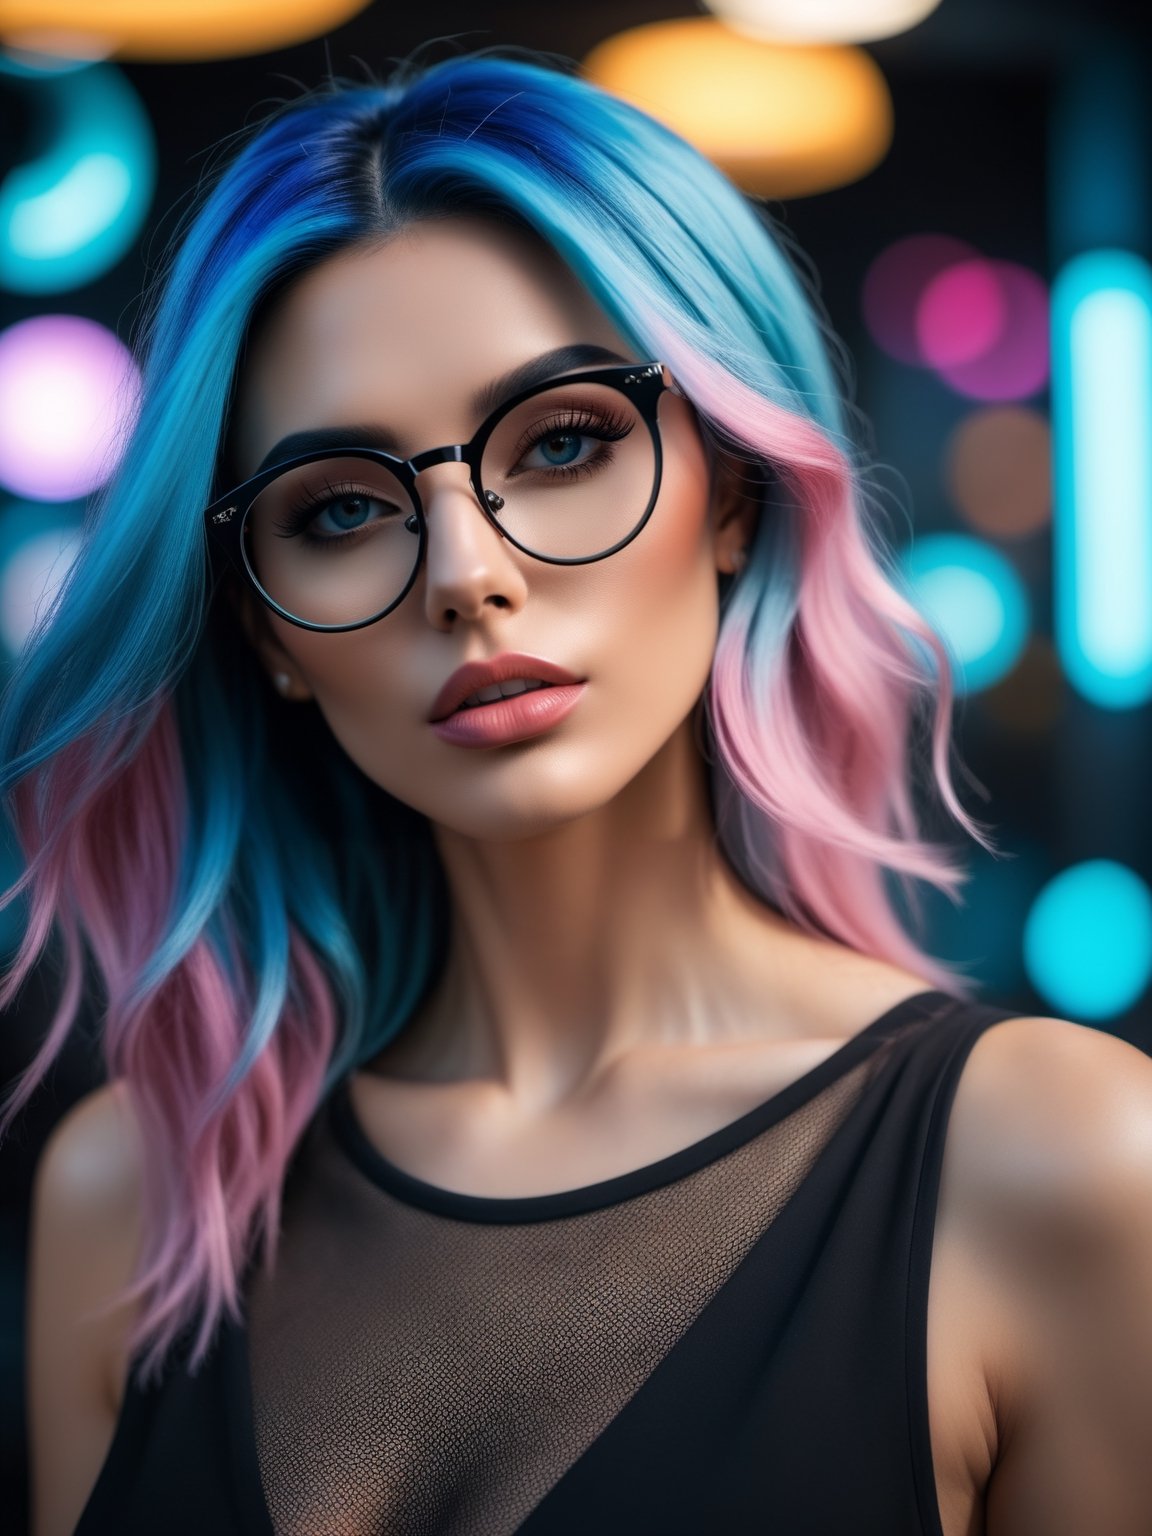 (Highest Quality, 4k, masterpiece, Amazing Details:1.1), Shallow Depth of Field, E671, lens 50mm f/2.0, (epic, natural skin, skin pores, detailed skin, girl focus) wide angle picture of a woman, blue hair, black frame glasses, rockstar, futuristic, neon, long wavy hair, cellphone, background in a room, realistic style, 8k,exposure blend, medium shot, bokeh, (hdr:1.4), high contrast, (cinematic), (muted colors, dim colors, soothing tones:1.3), low saturation, (hyperdetailed:1.2), (noir:0.4), (photorealistic) (RAW Photo), aesthetic portrait, old style,aw0k euphoric style,cpbg,coocolor,3d toon style